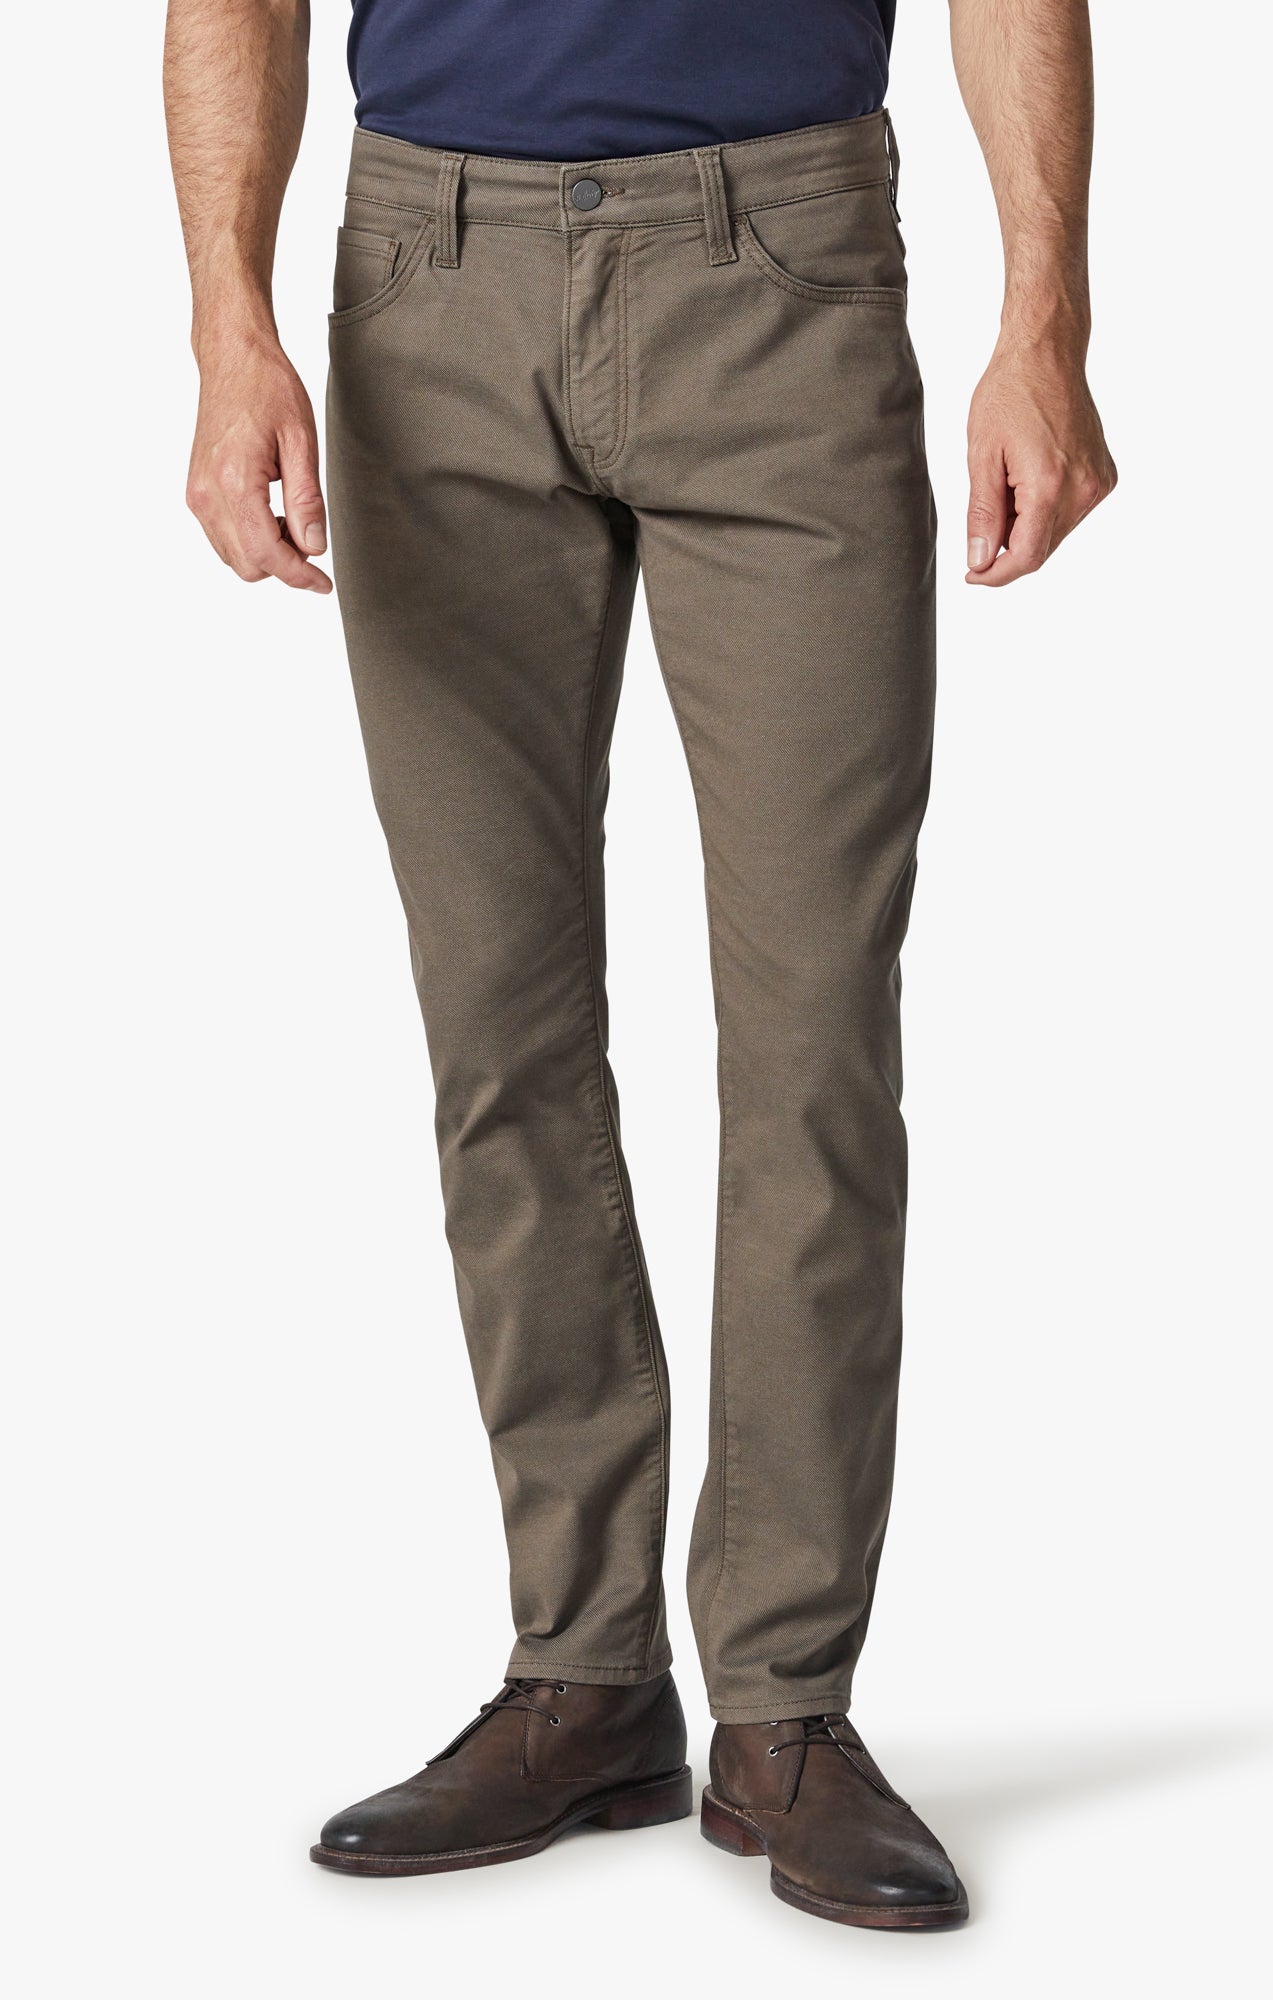 Courage Straight Leg Pants in Canteen Coolmax Image 2